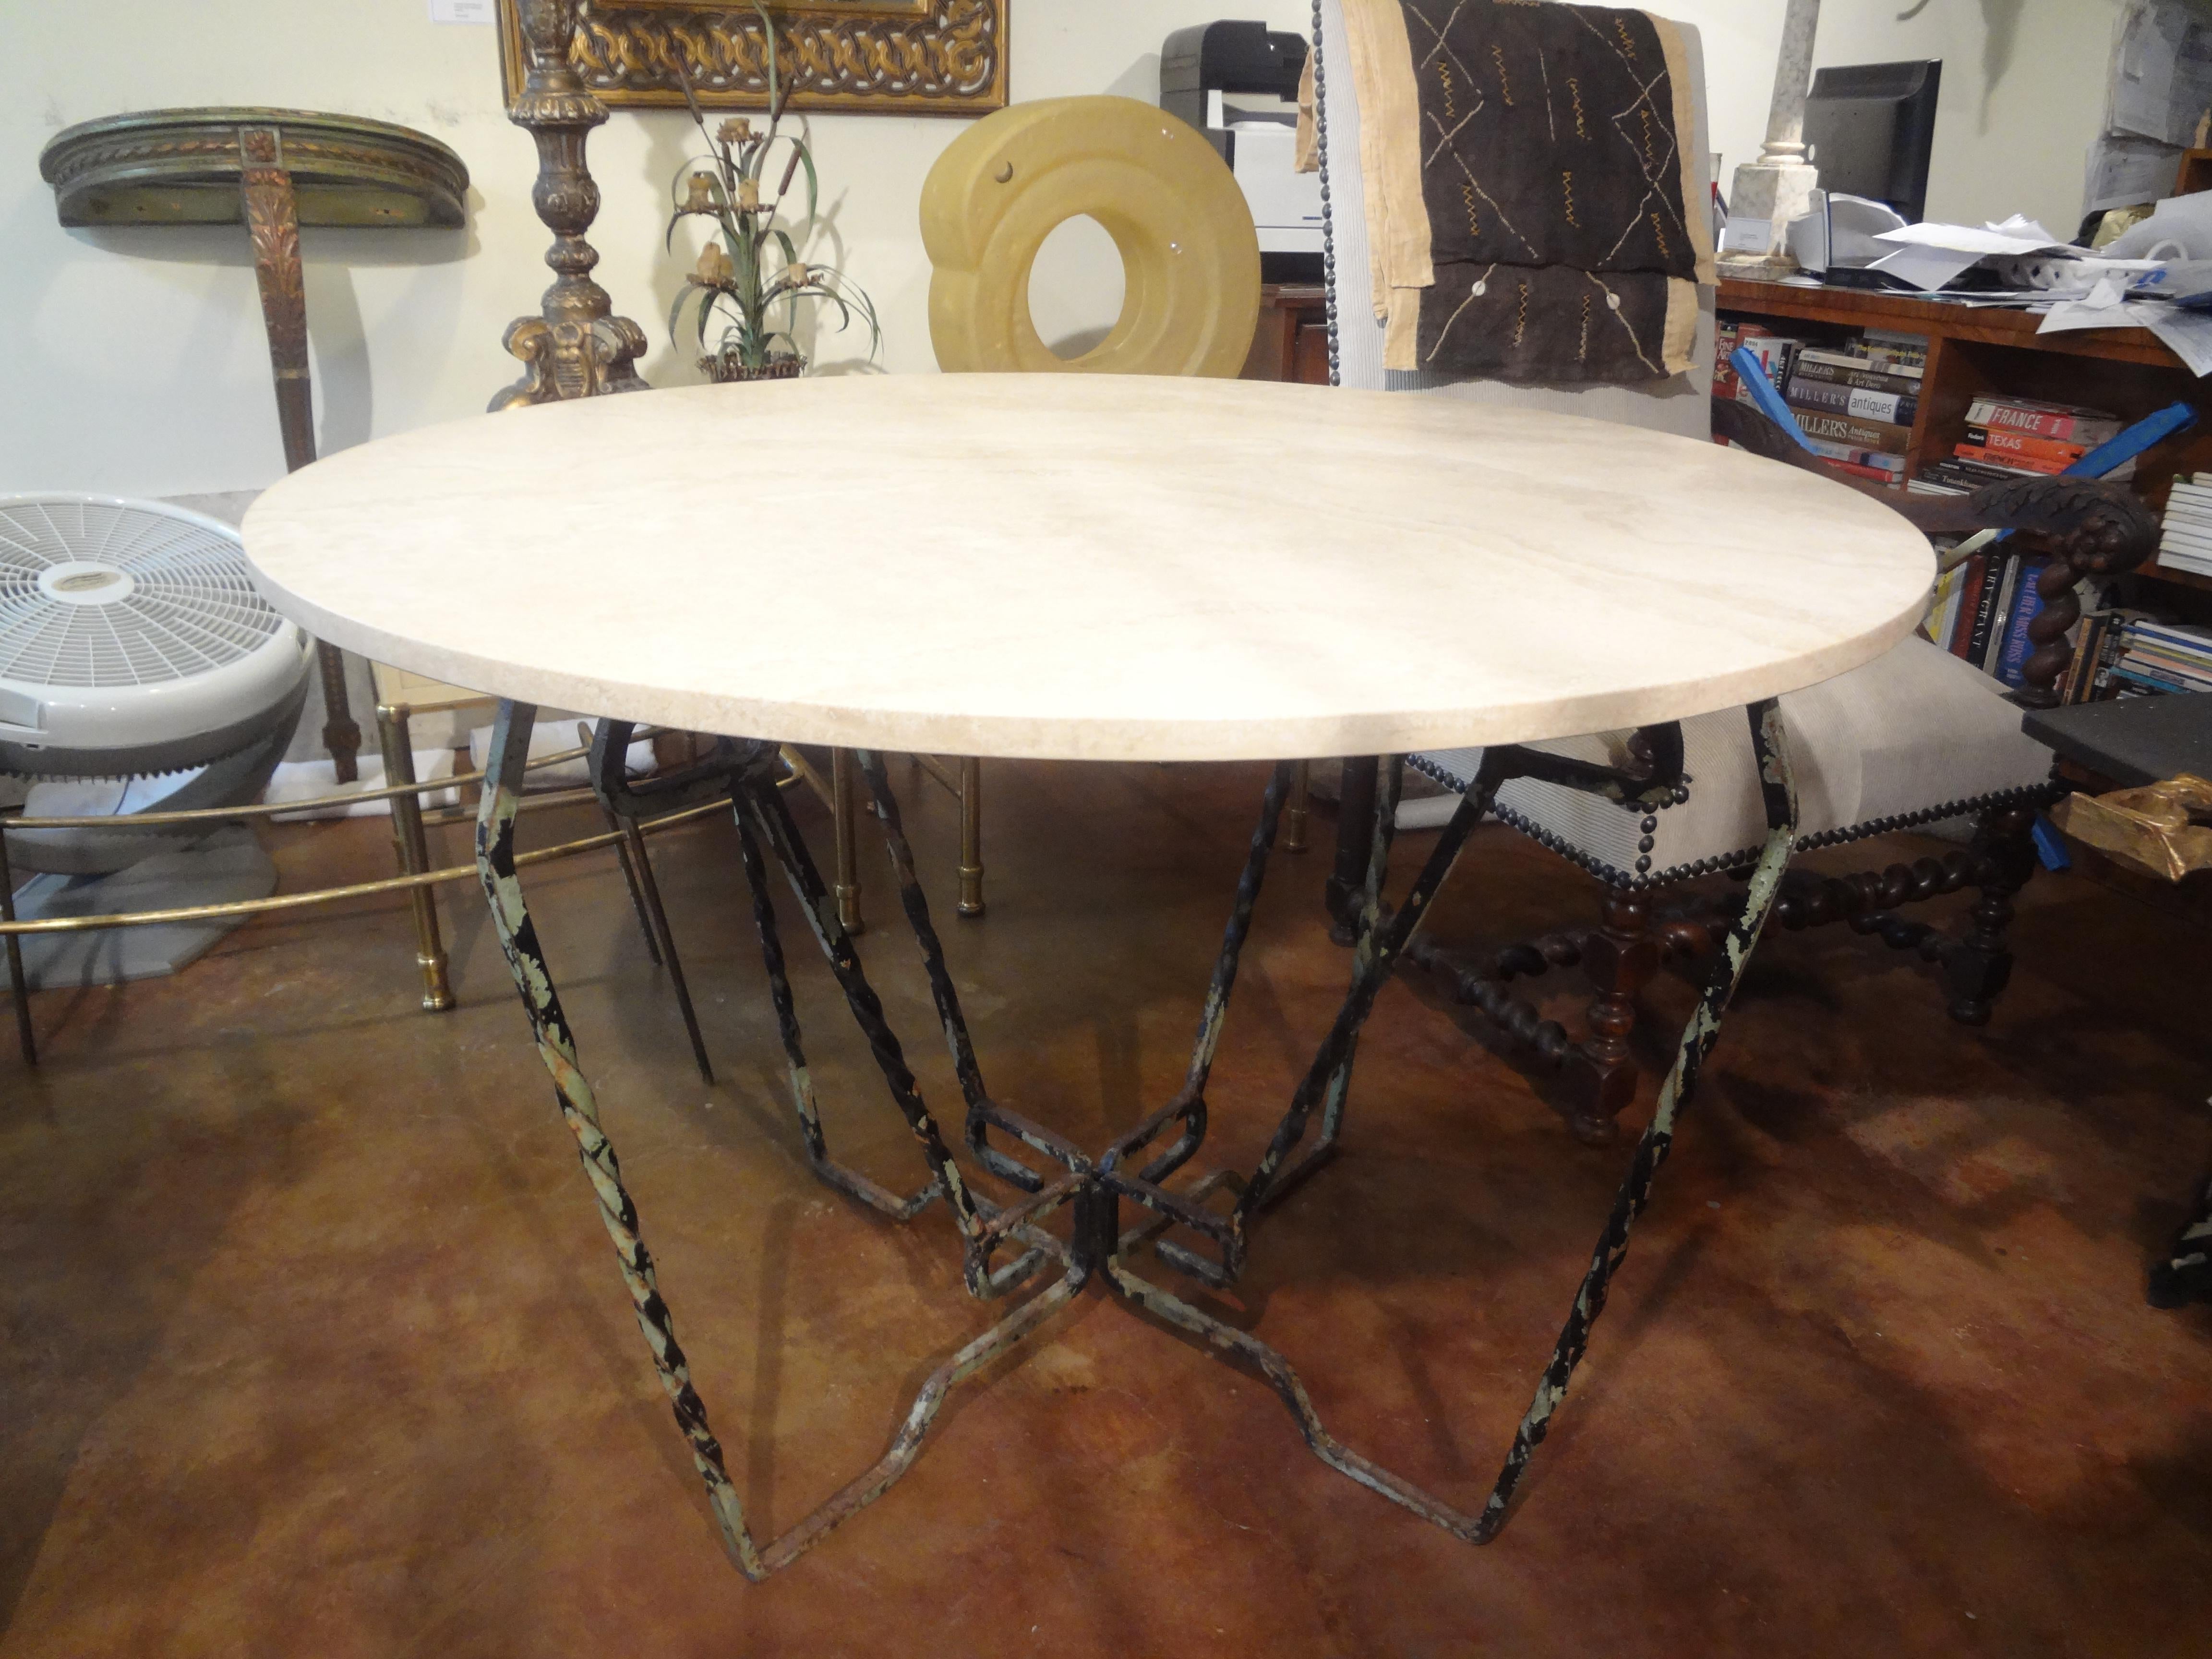 French Wrought Iron Center Table With Travertine Top.
Our French Neoclassical style hand forged wrought iron center table, dining table or garden table has a Greek key design and a beautiful honed 42 inch travertine top. The iron work has a